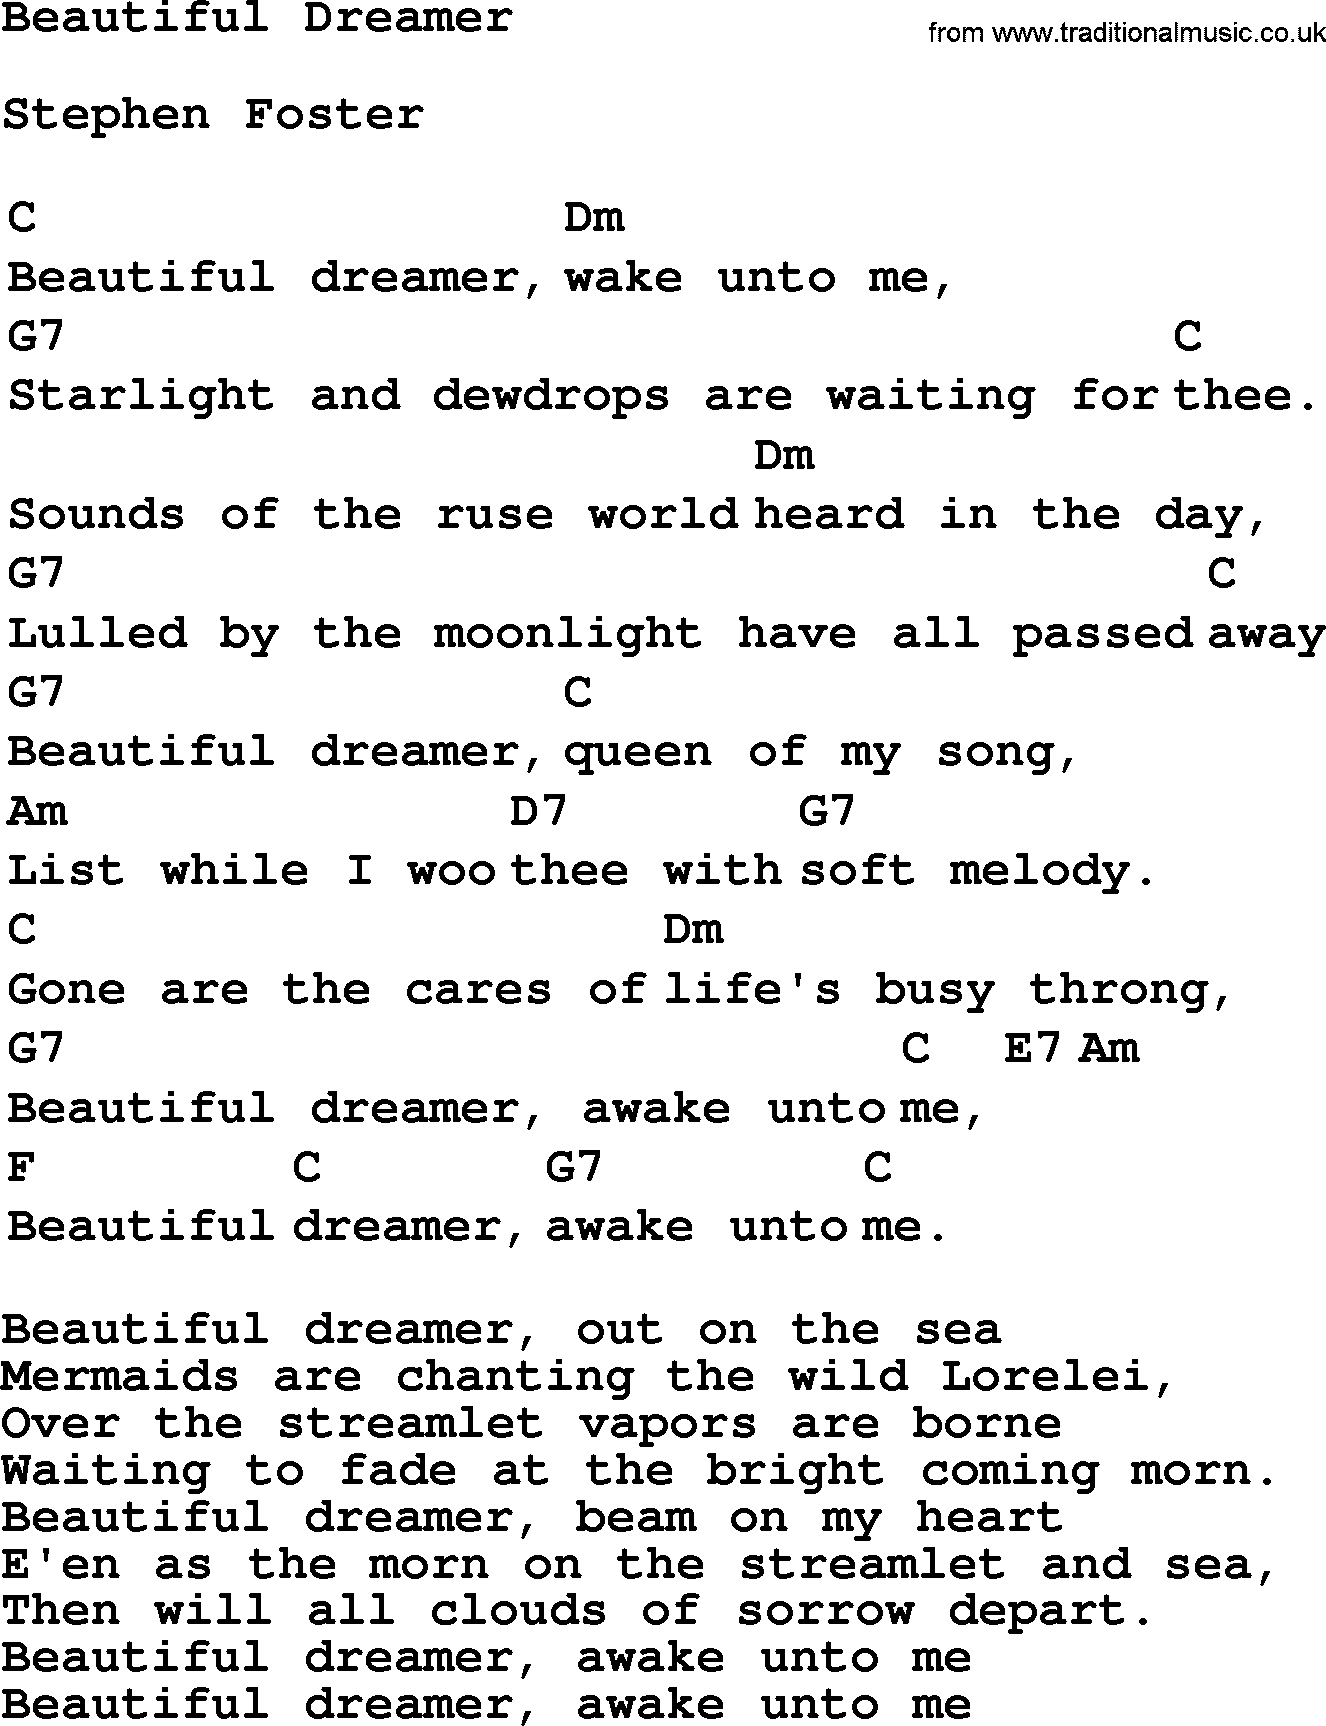 Top 1000 Most Popular Folk and Old-time Songs: Beautiful Dreamer, lyrics and chords